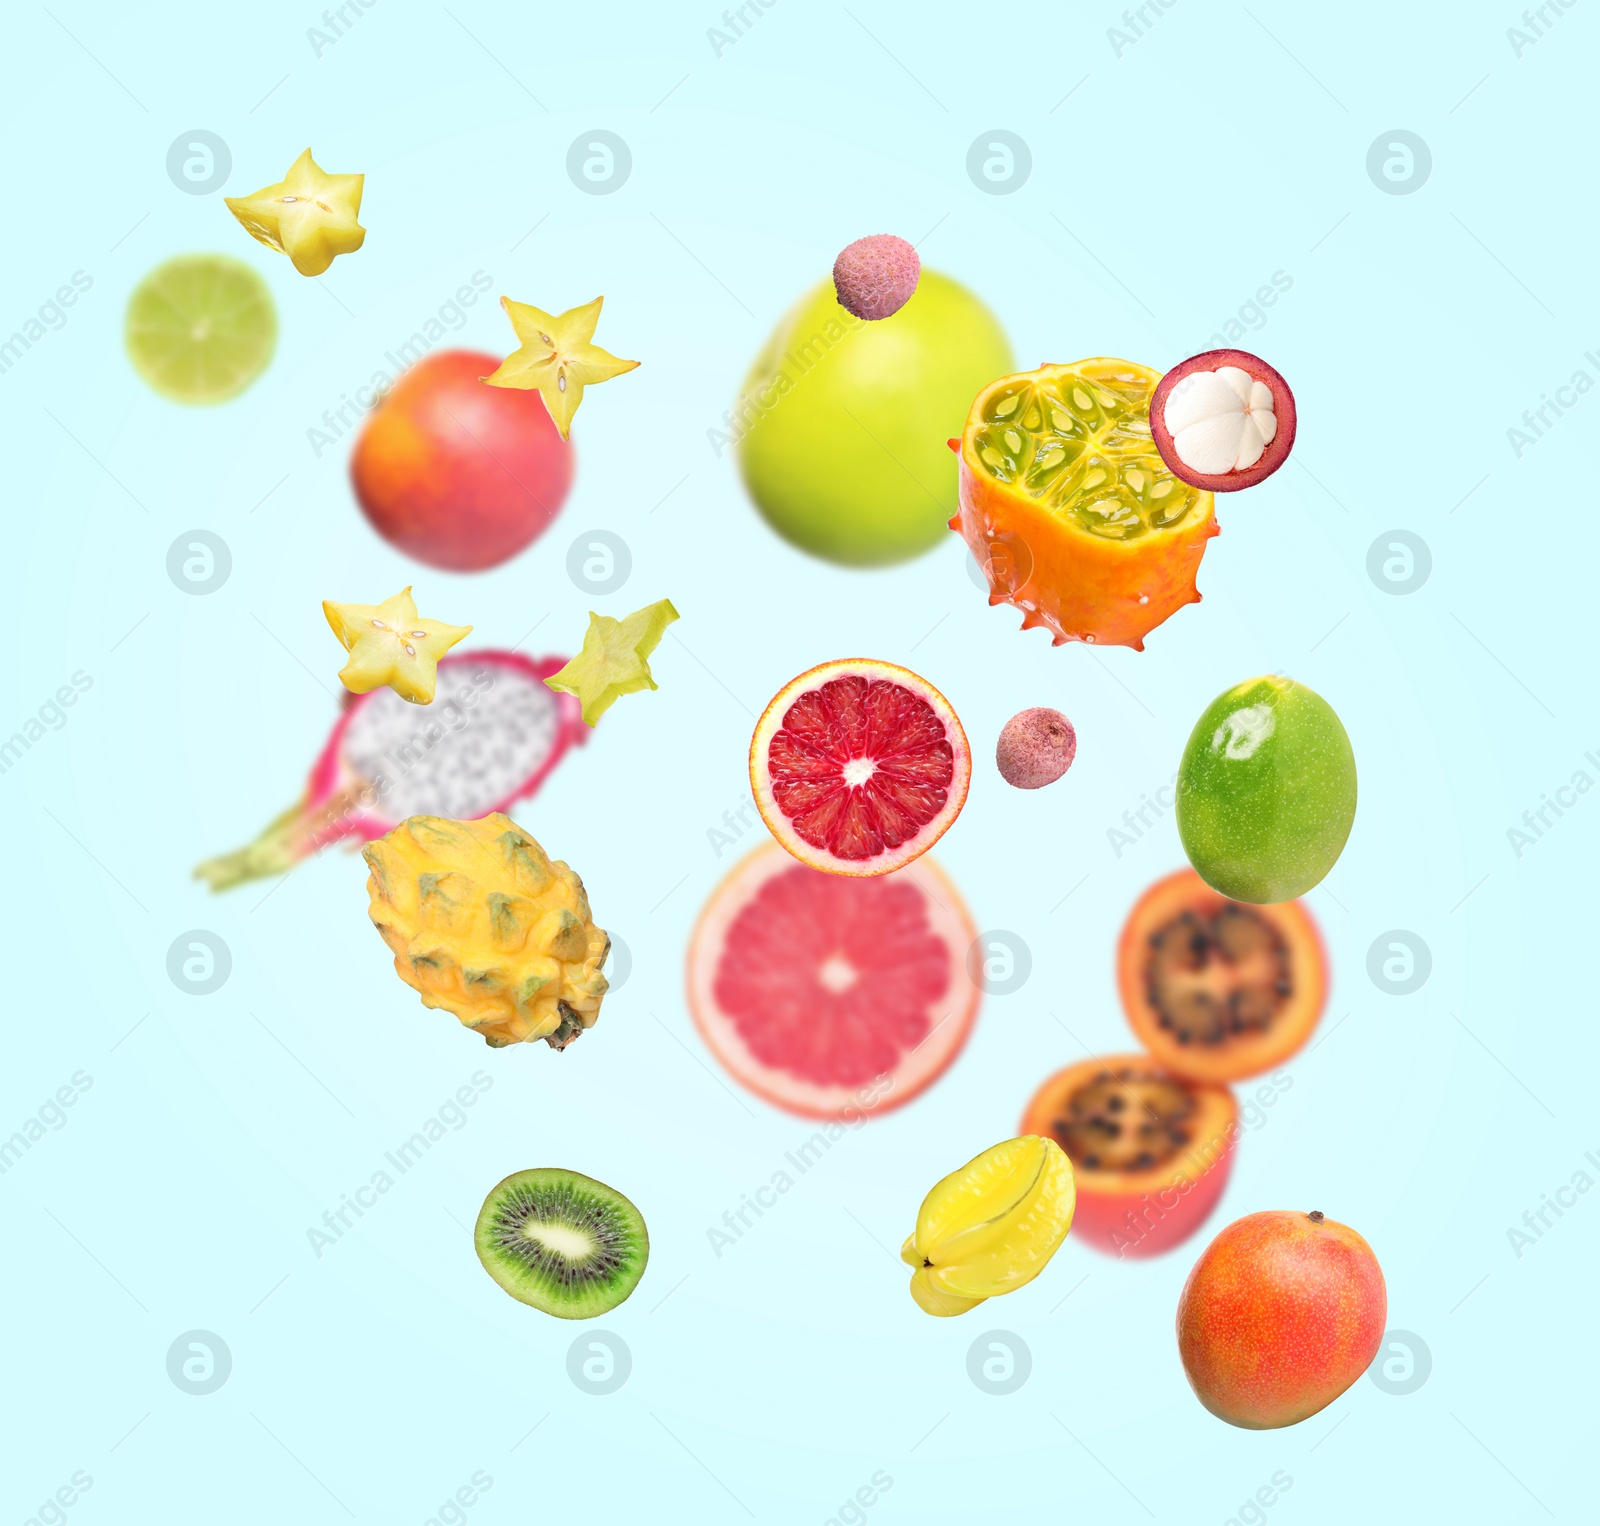 Image of Different tasty exotic fruits flying on turquoise background